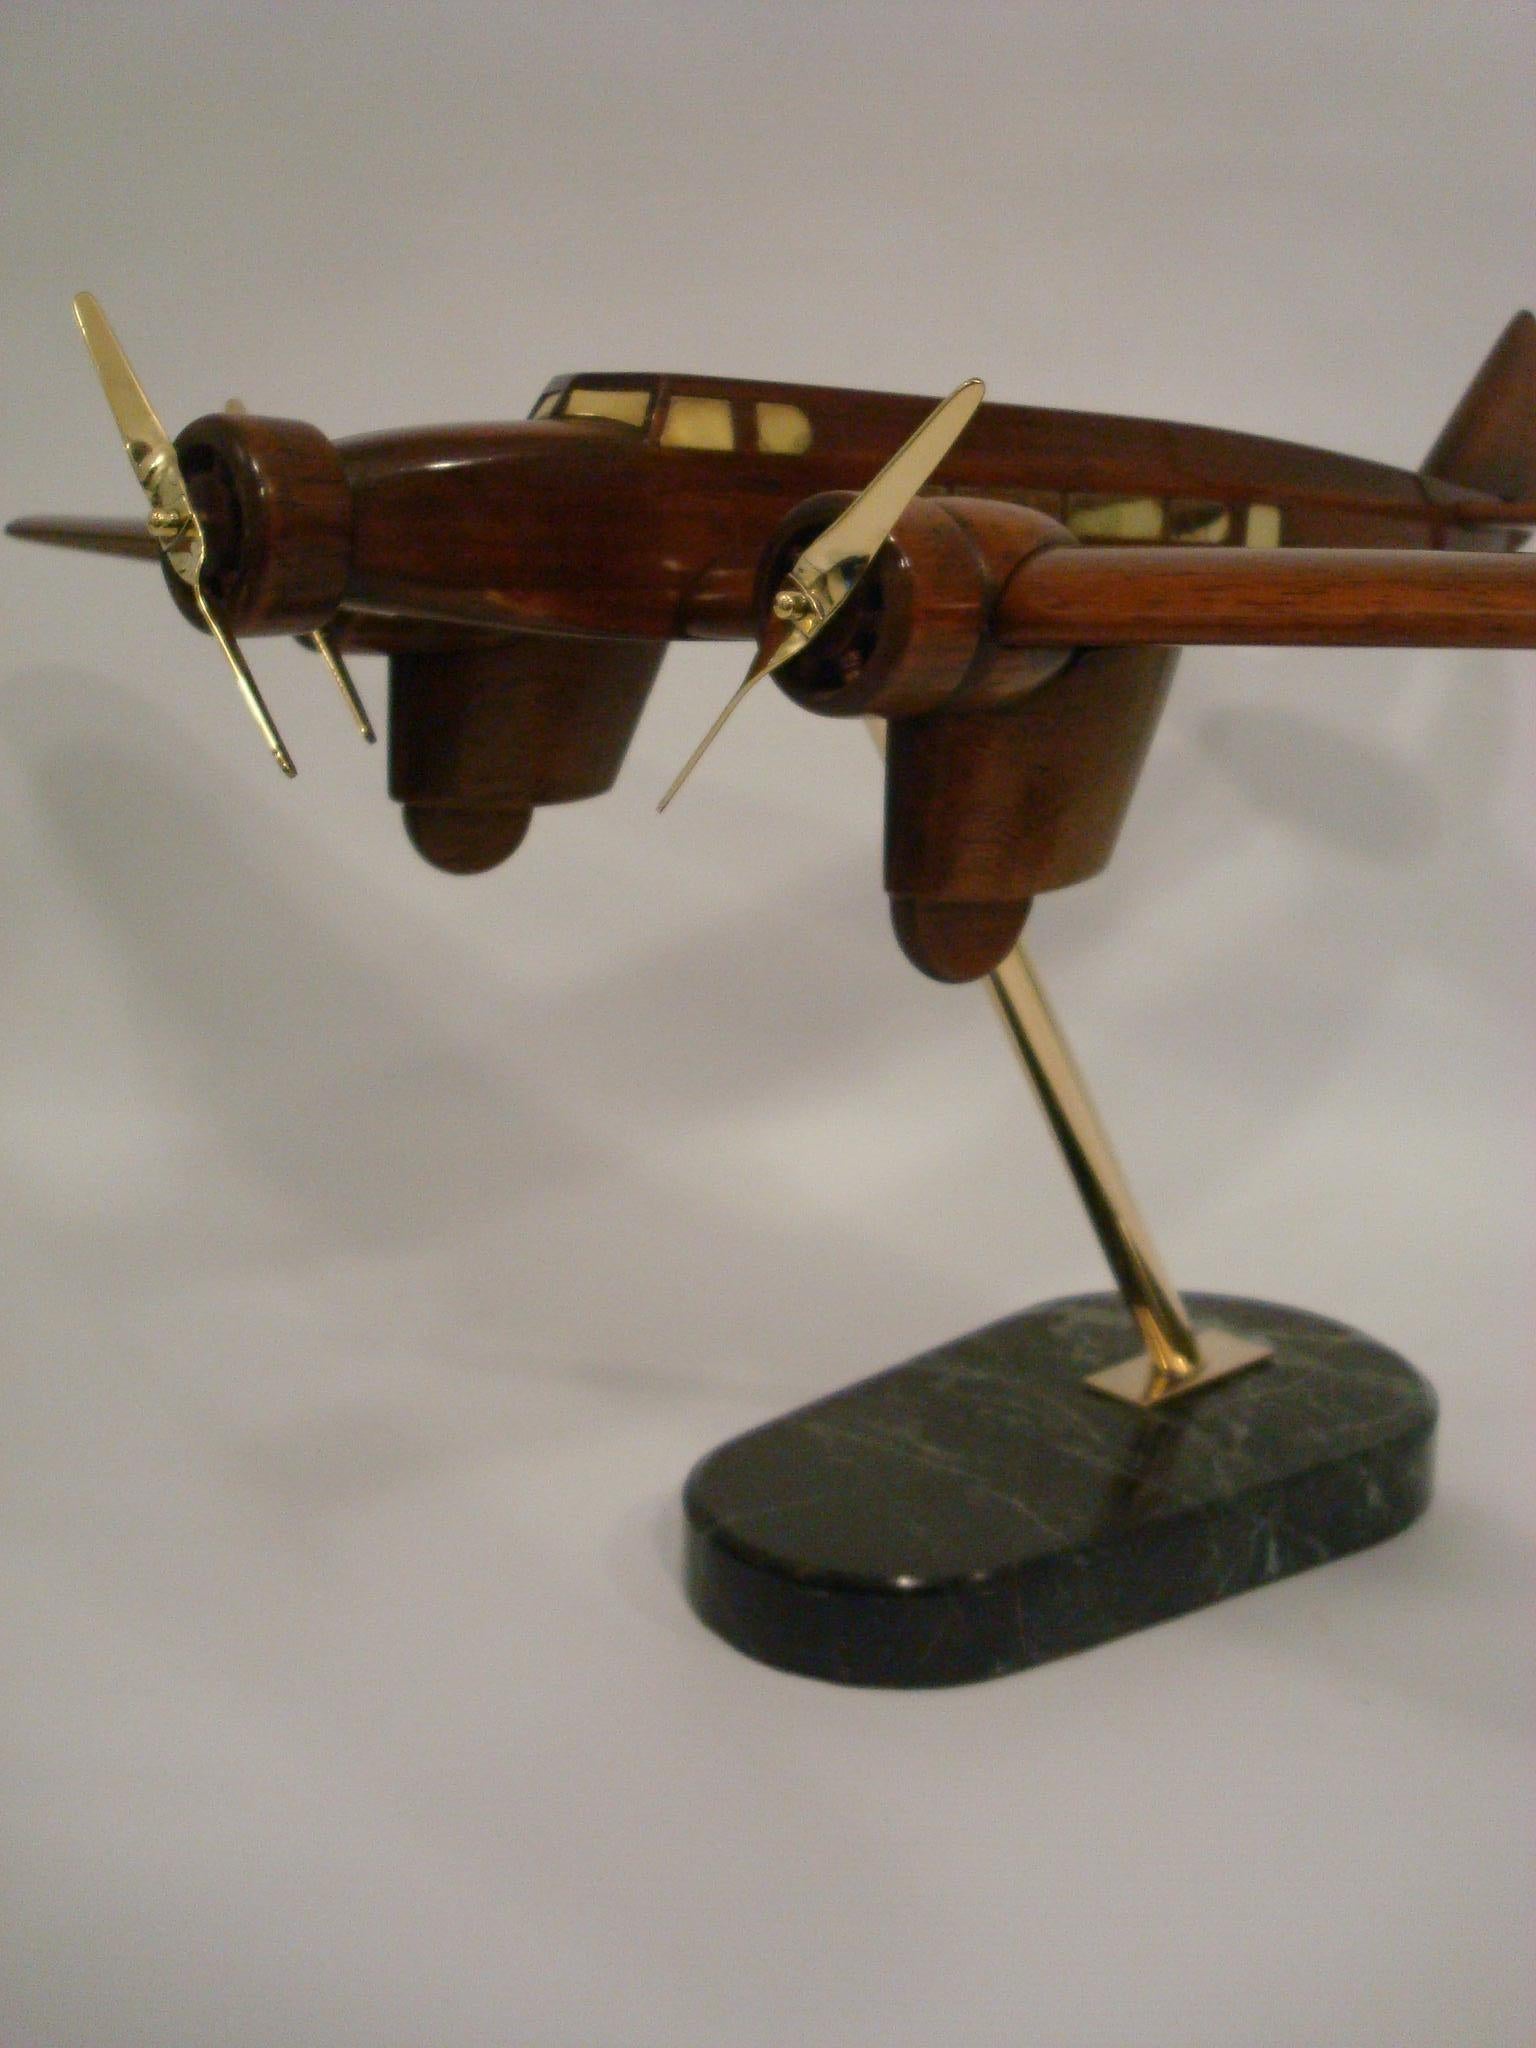 Art Deco Dewoitine Wooden Counters Desk Model Airplane 1930s French For Sale 2